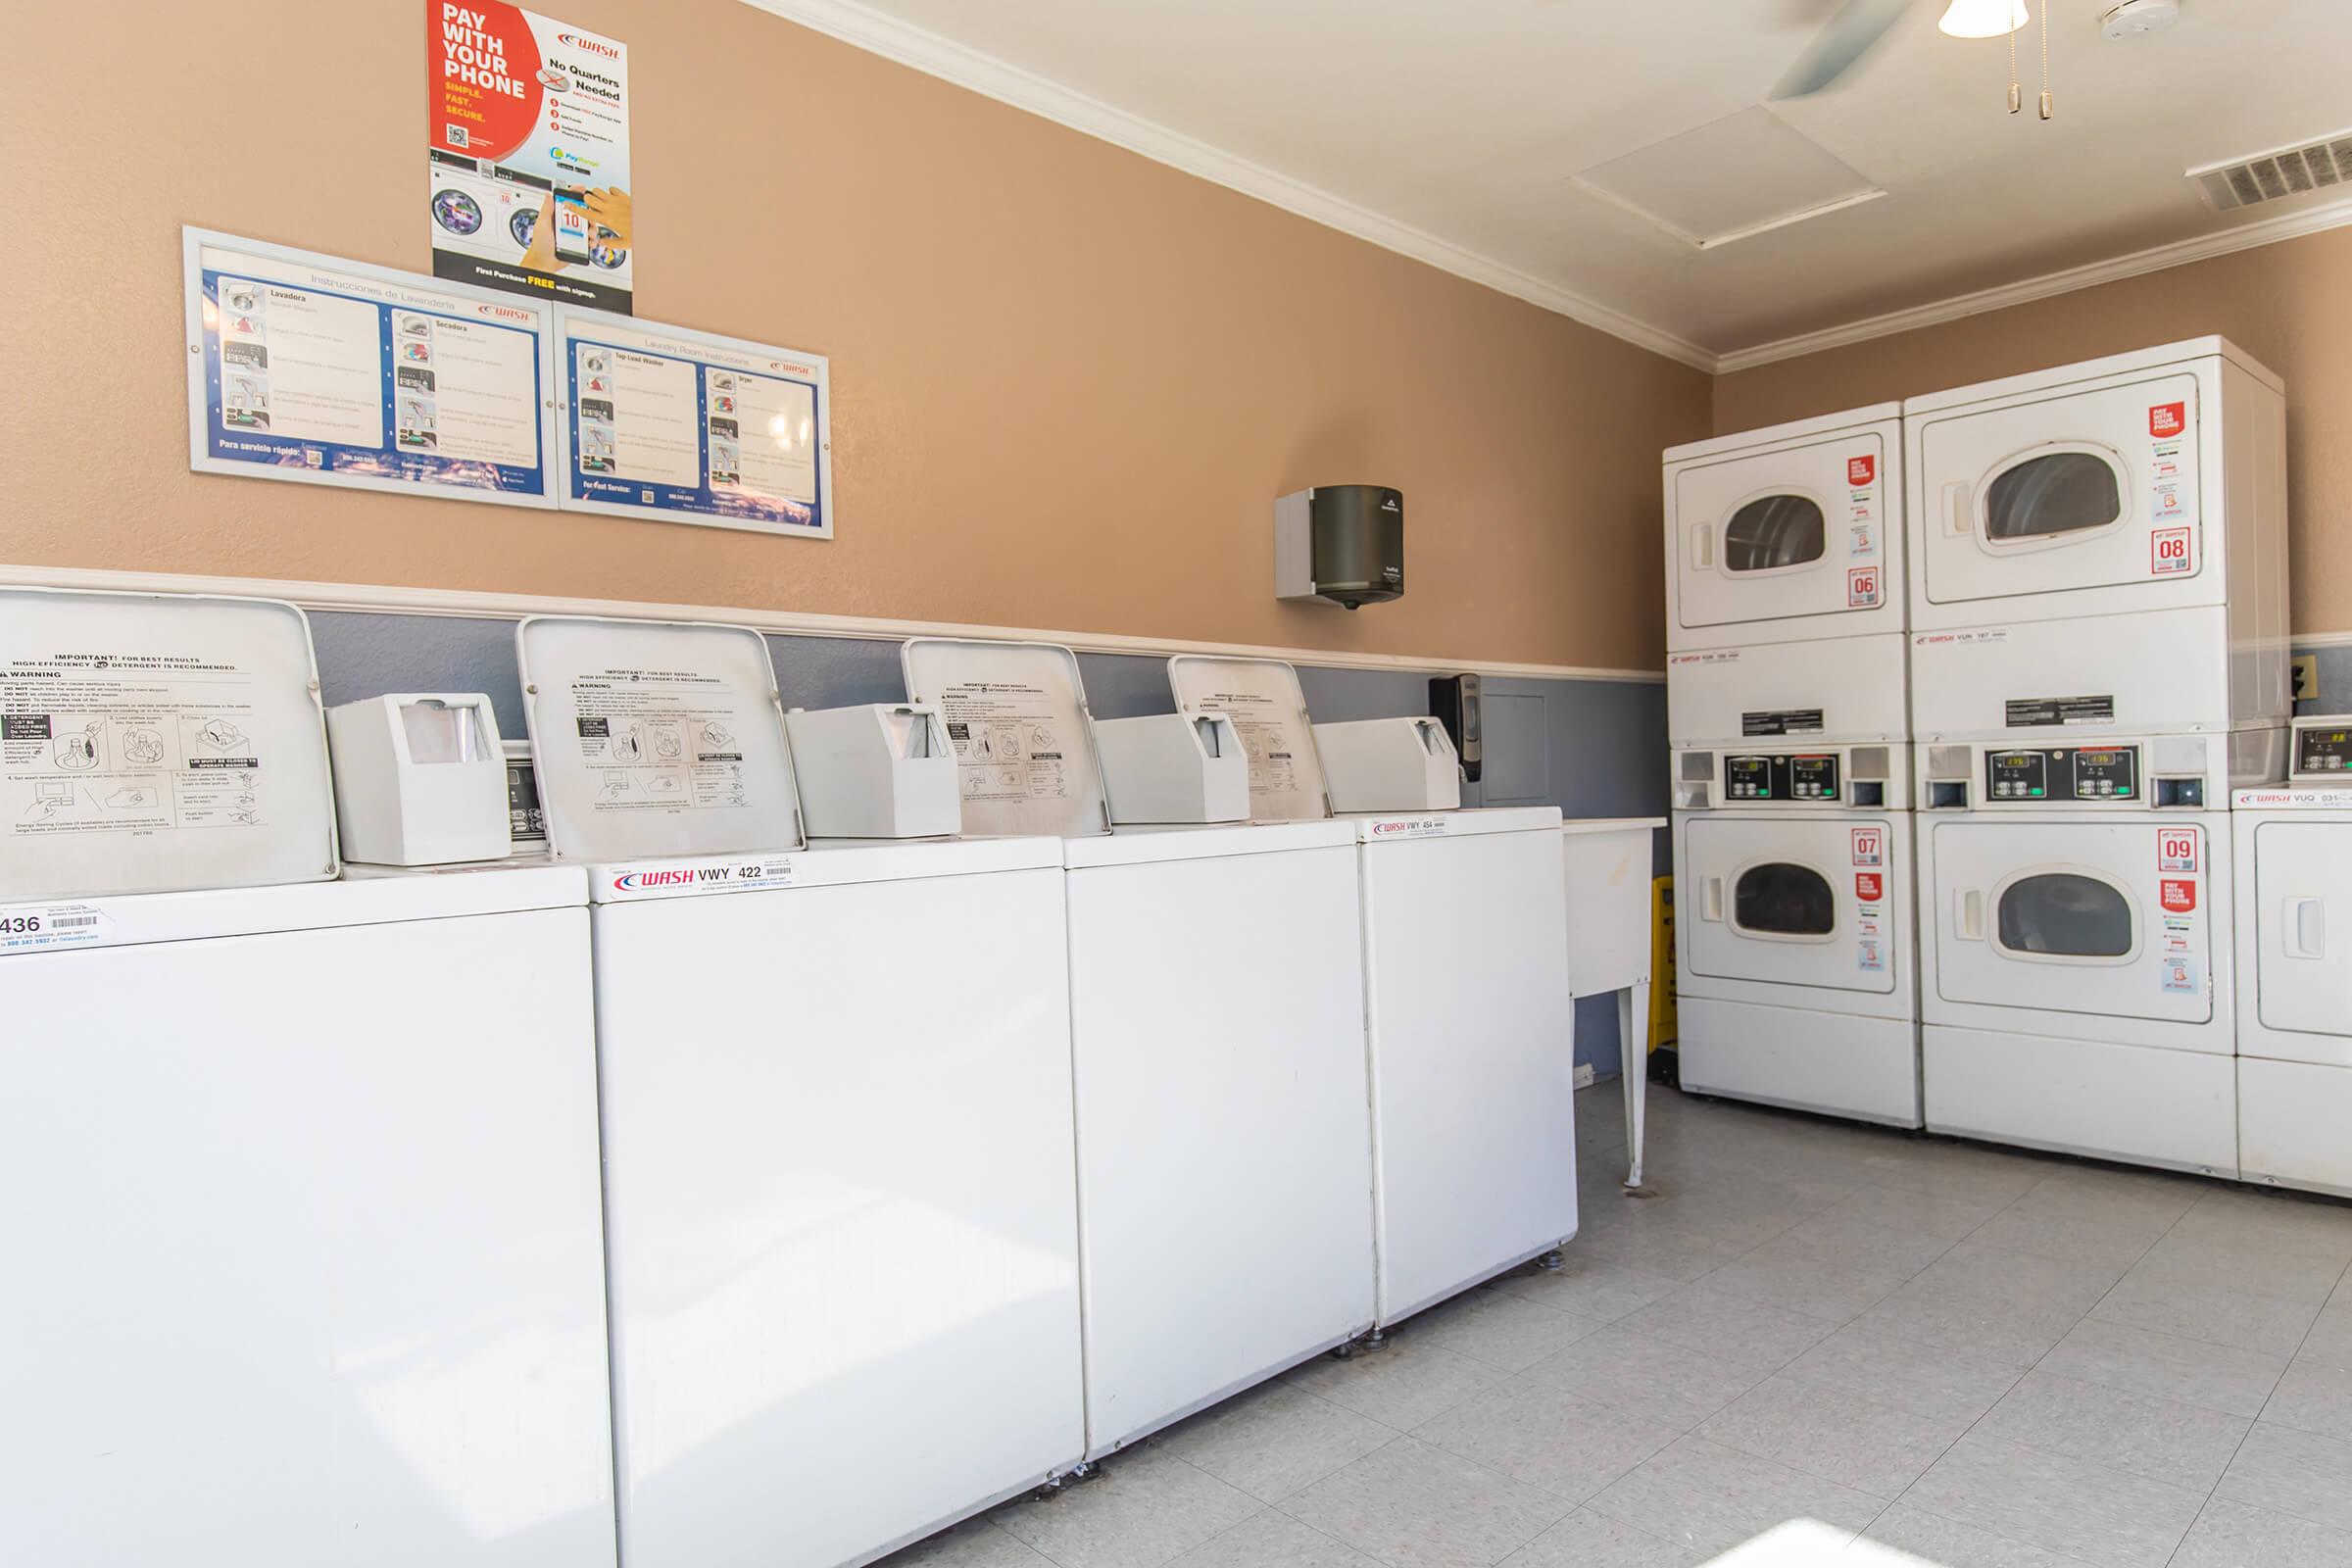 washers and dryers in the community laundry